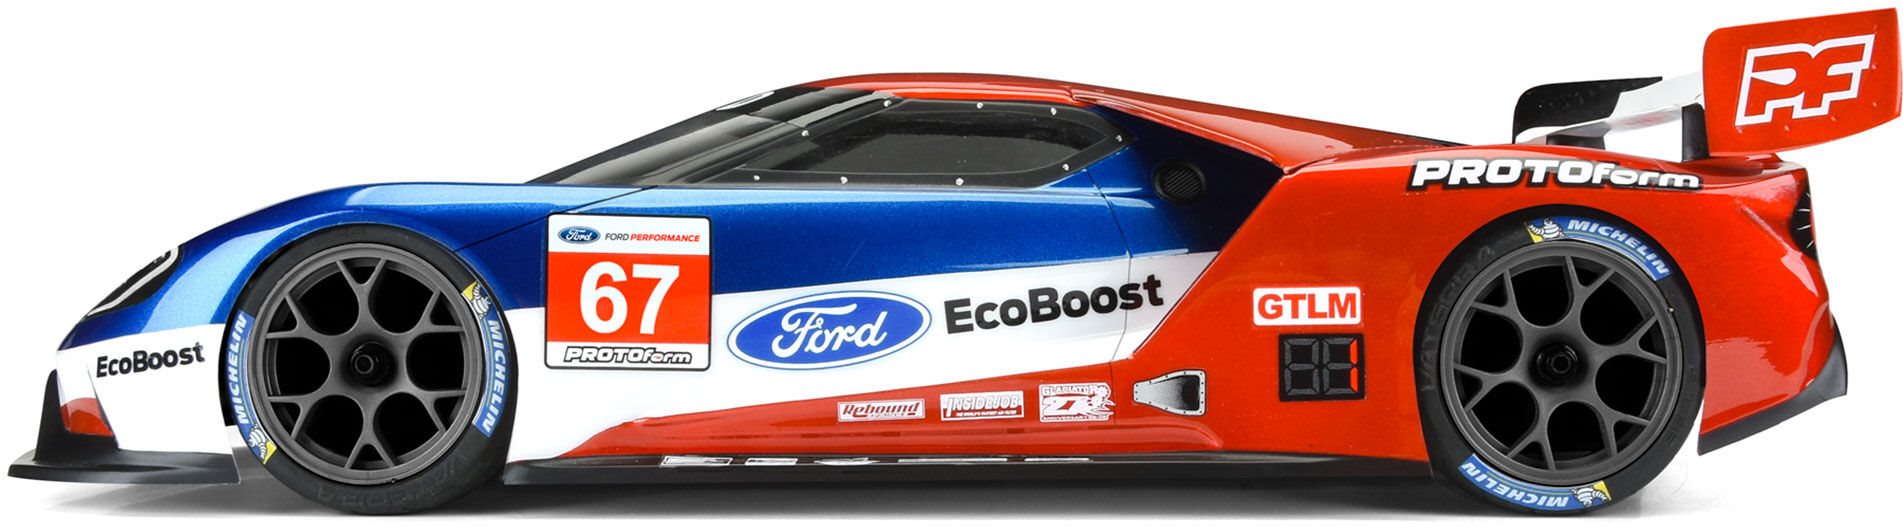 Protoform 1/10 Ford GT LW Clear Body: 190mm Touring Car with LP